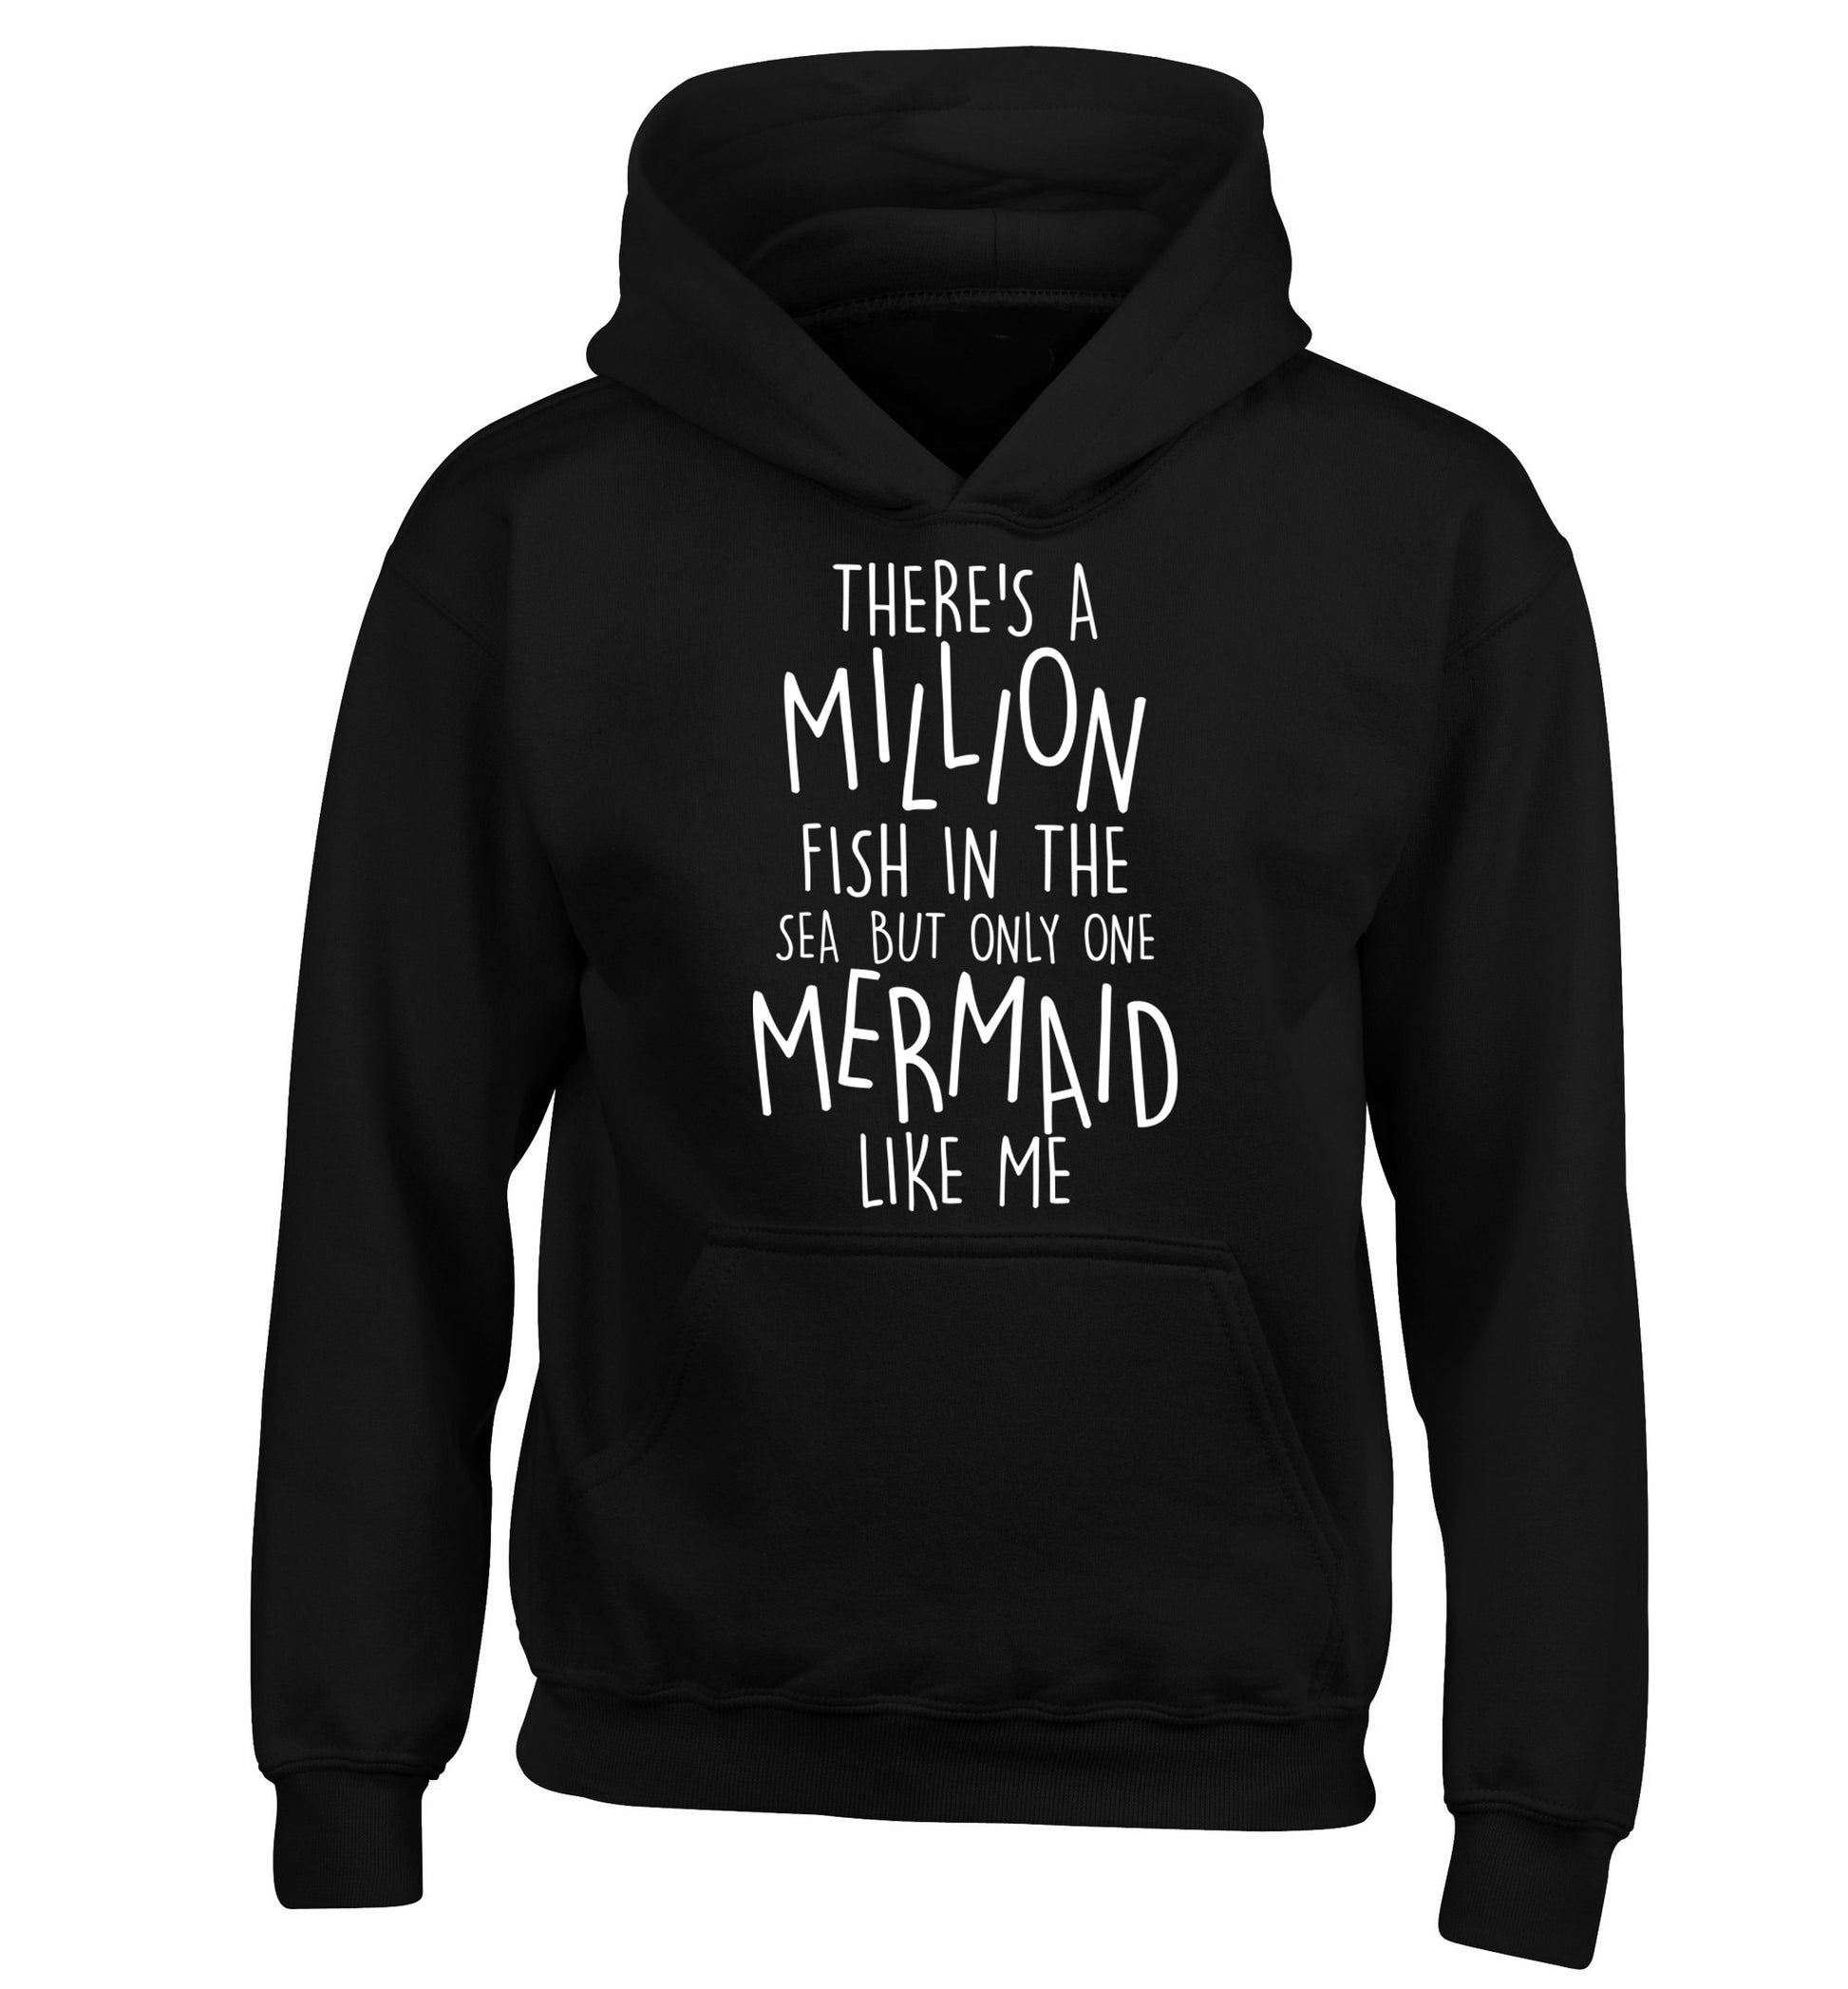 There's a million fish in the sea but only one mermaid like me children's black hoodie 12-13 Years